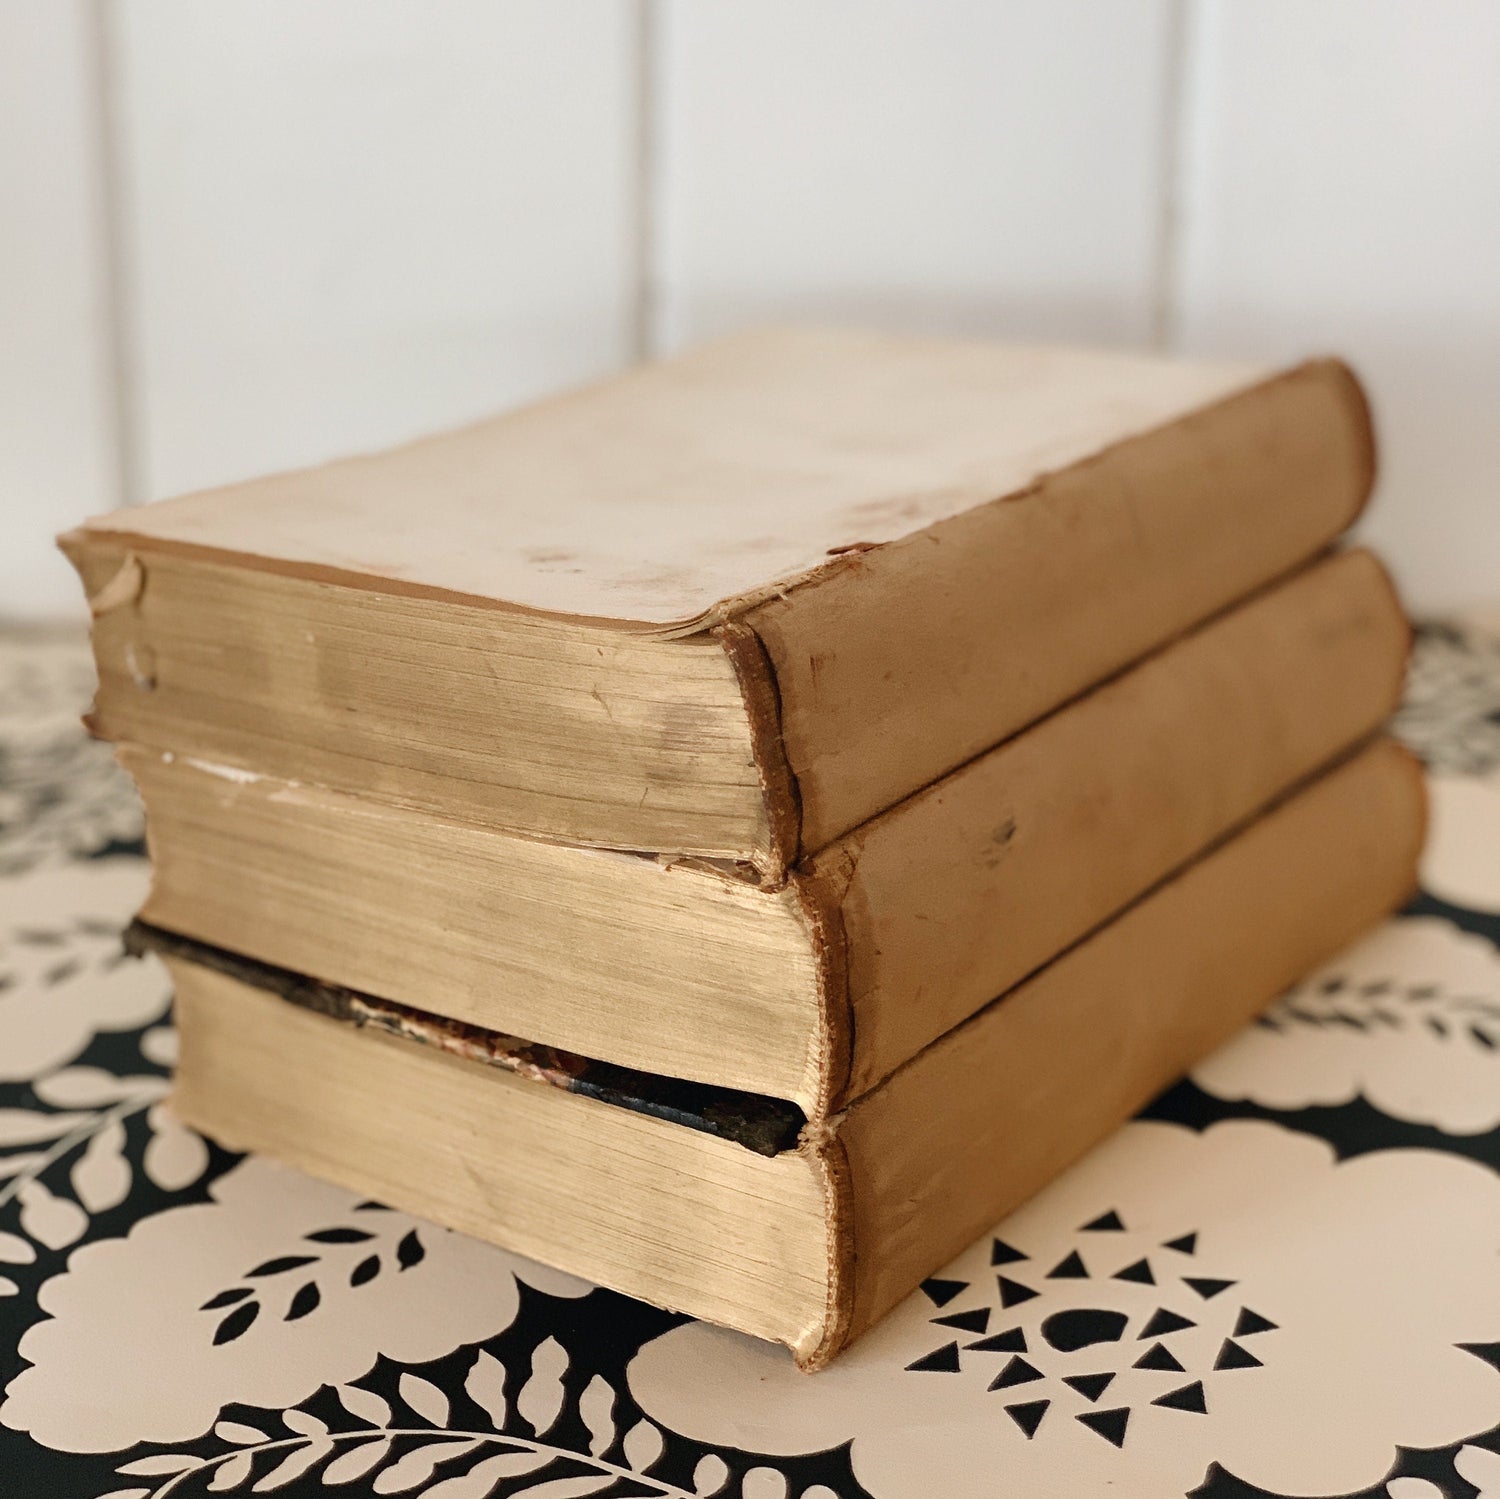 Unbound and Distressed Books for Decor - Antique Book Bundle, William Makepeace Thackeray